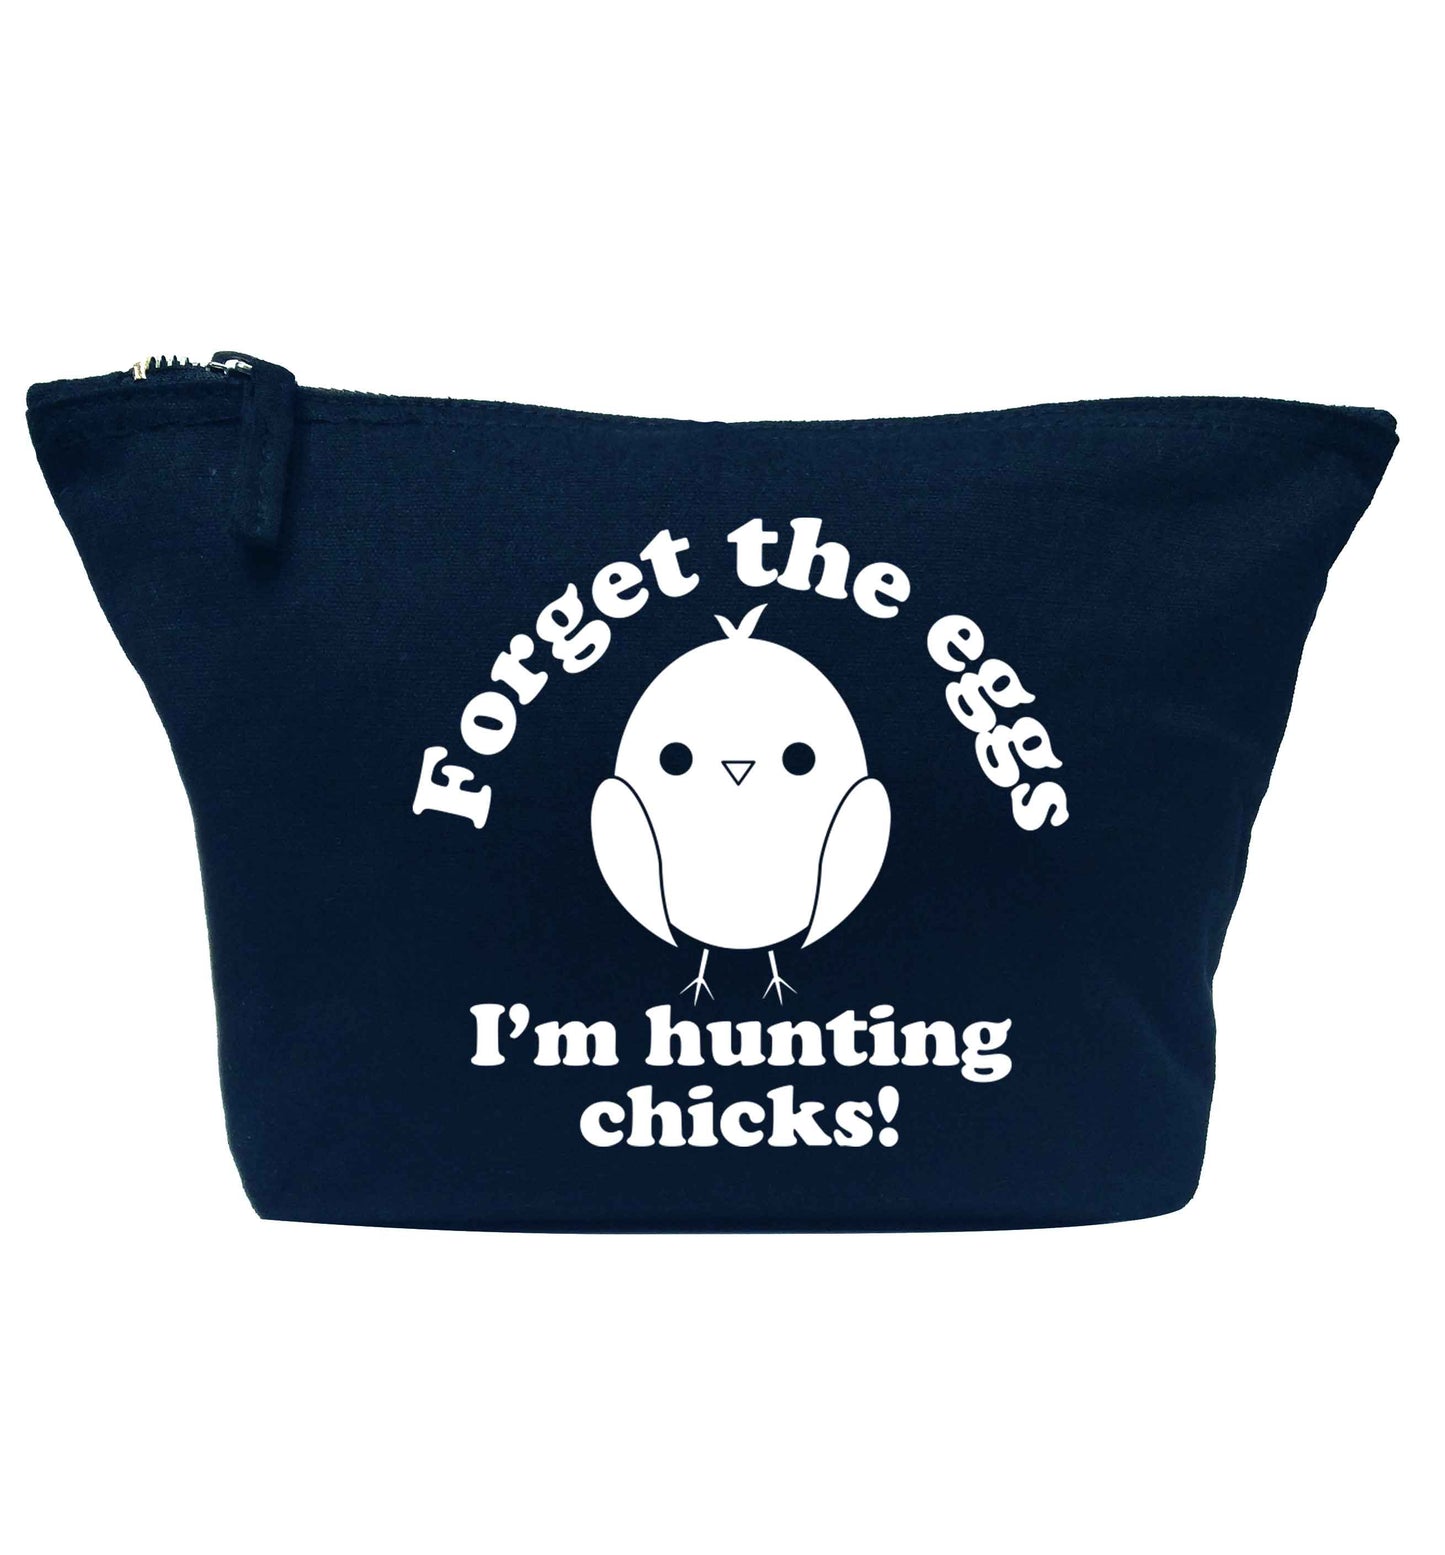 Forget the eggs I'm hunting chicks! navy makeup bag